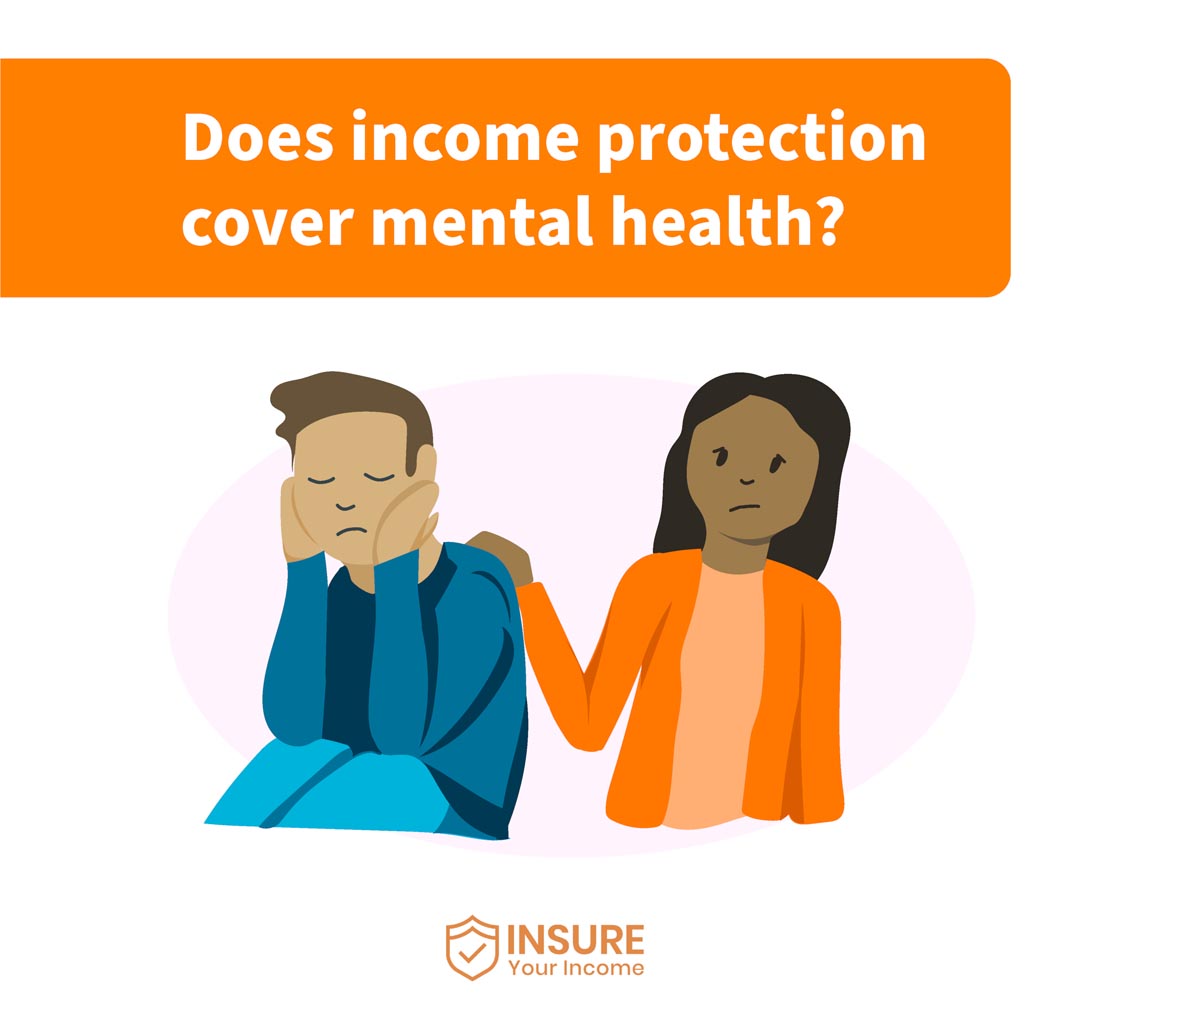 Does income protection cover mental health